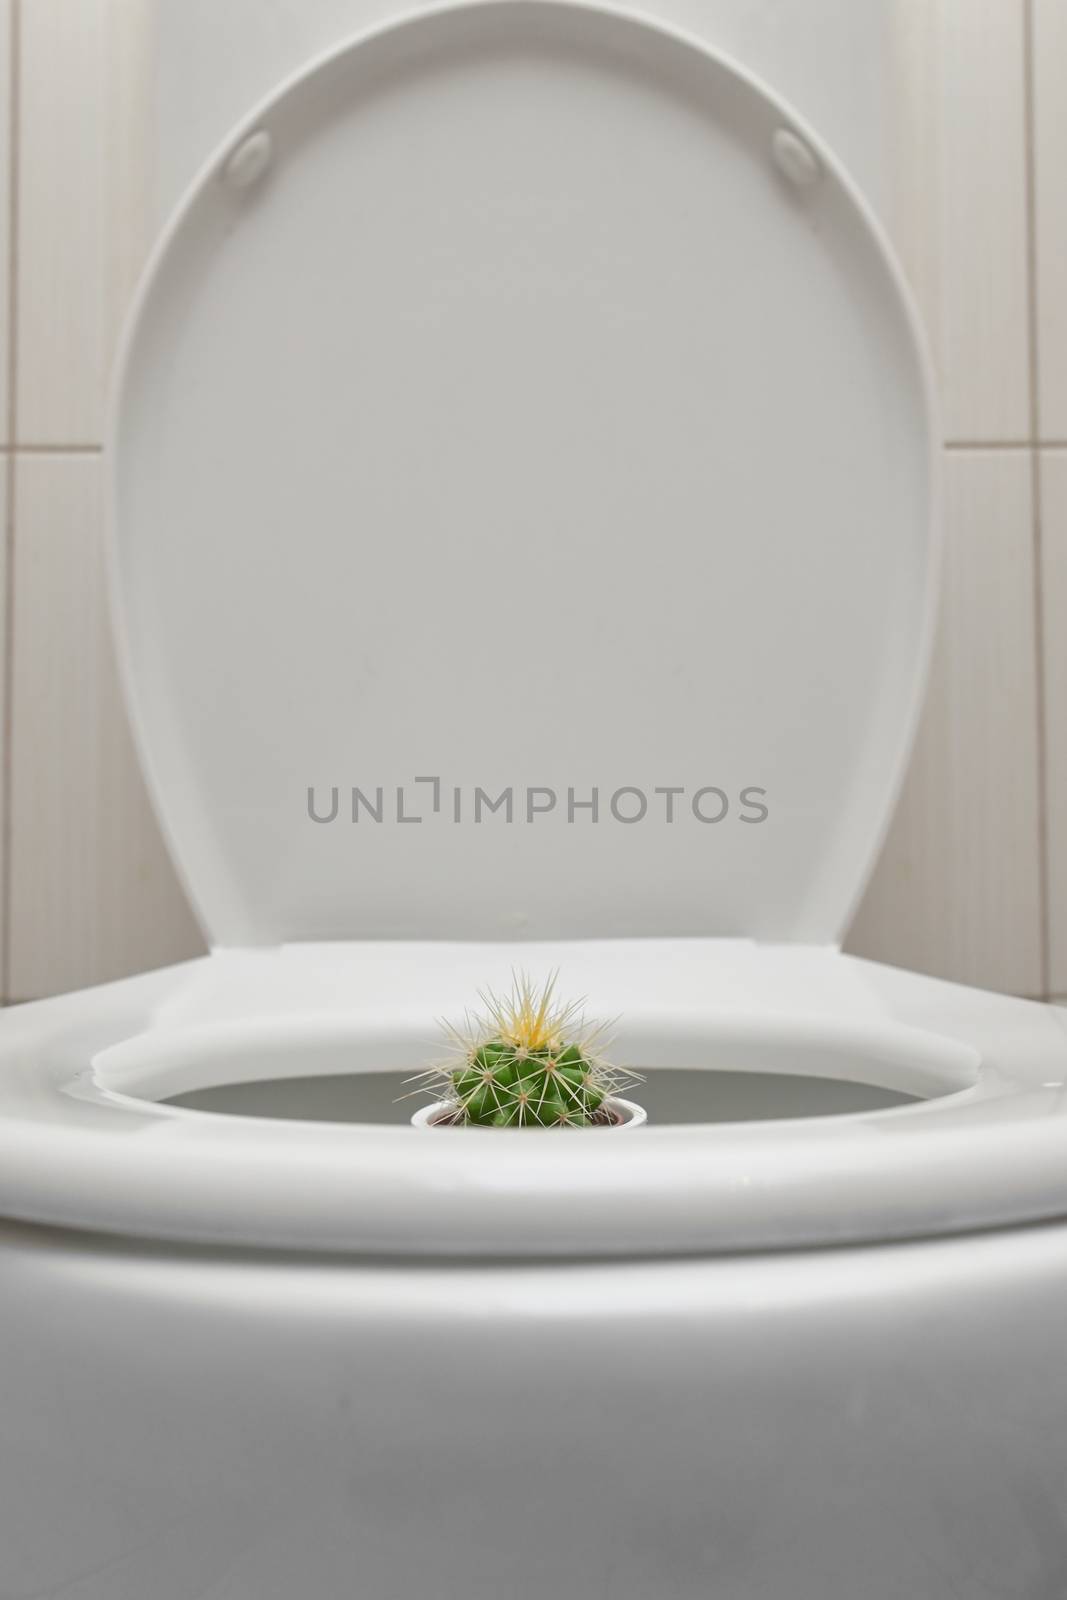 Hemorrhoids Pain With Thorny Cactus inside Toilet by mady70